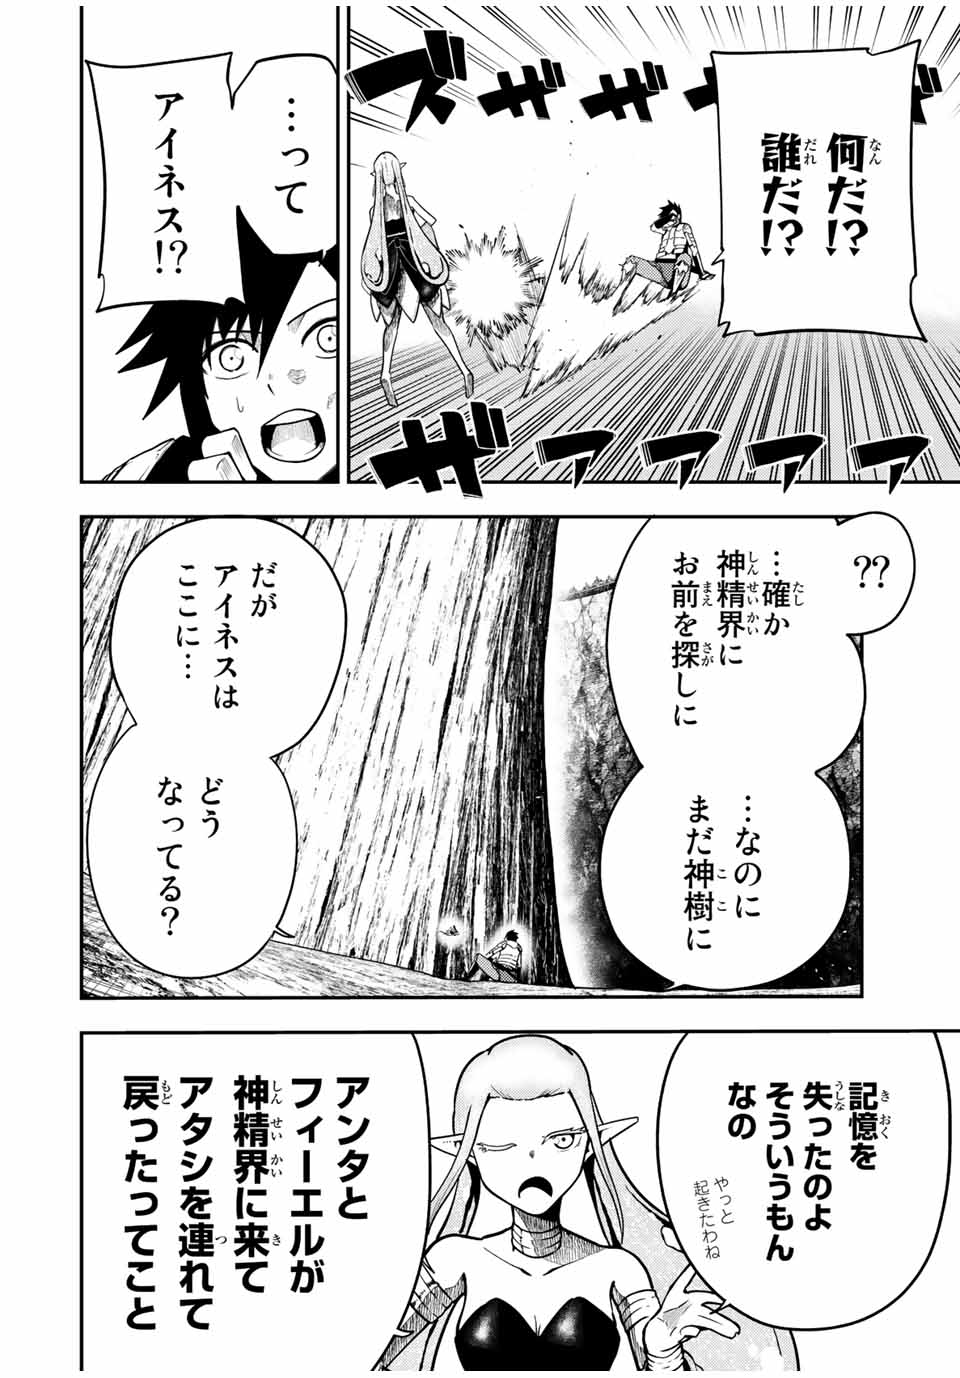 the strongest former prince-; 奴隷転生 ～その奴隷、最強の元王子につき～ 第78話 - Page 2